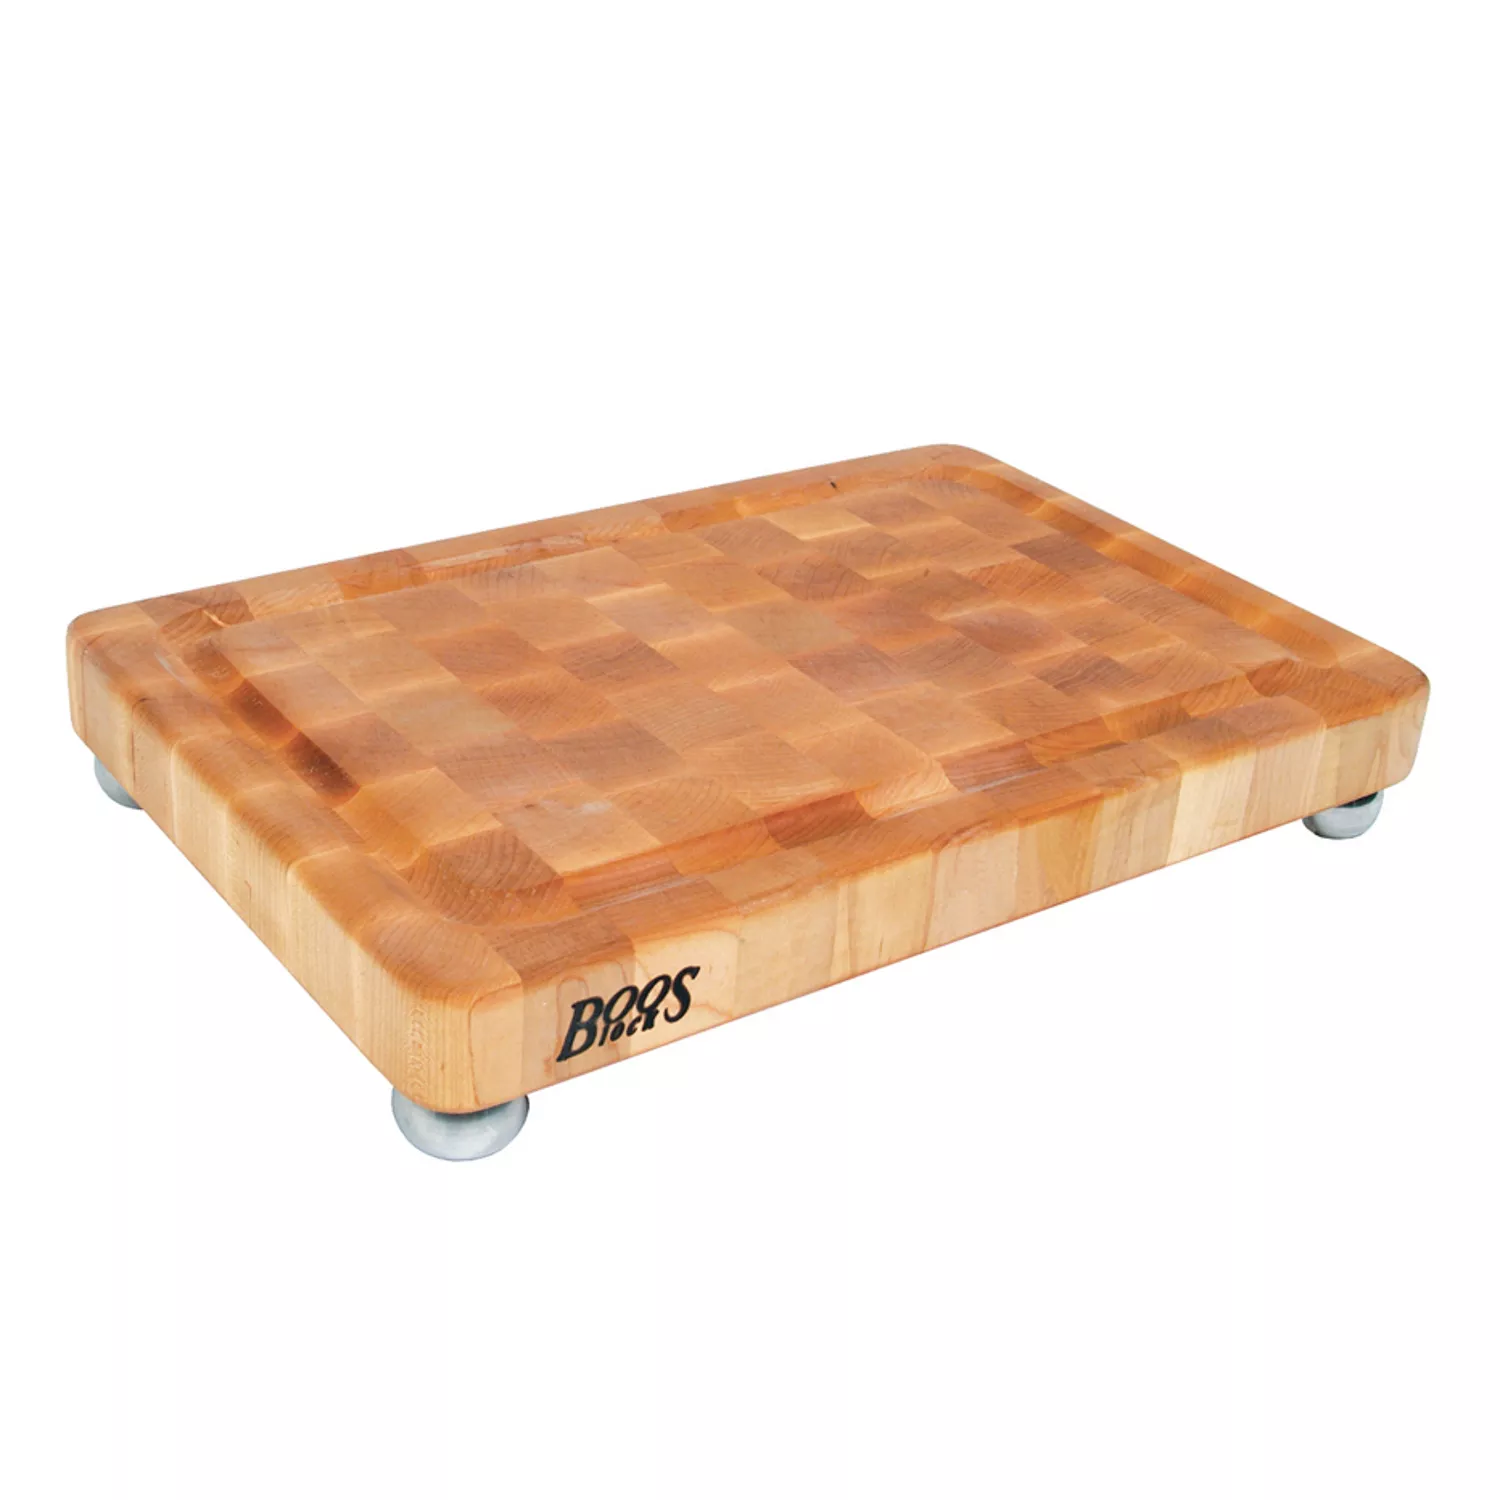 John Boos End Grain Cutting Boards with Juice Groove and Feet, 18"x12"x1.75"